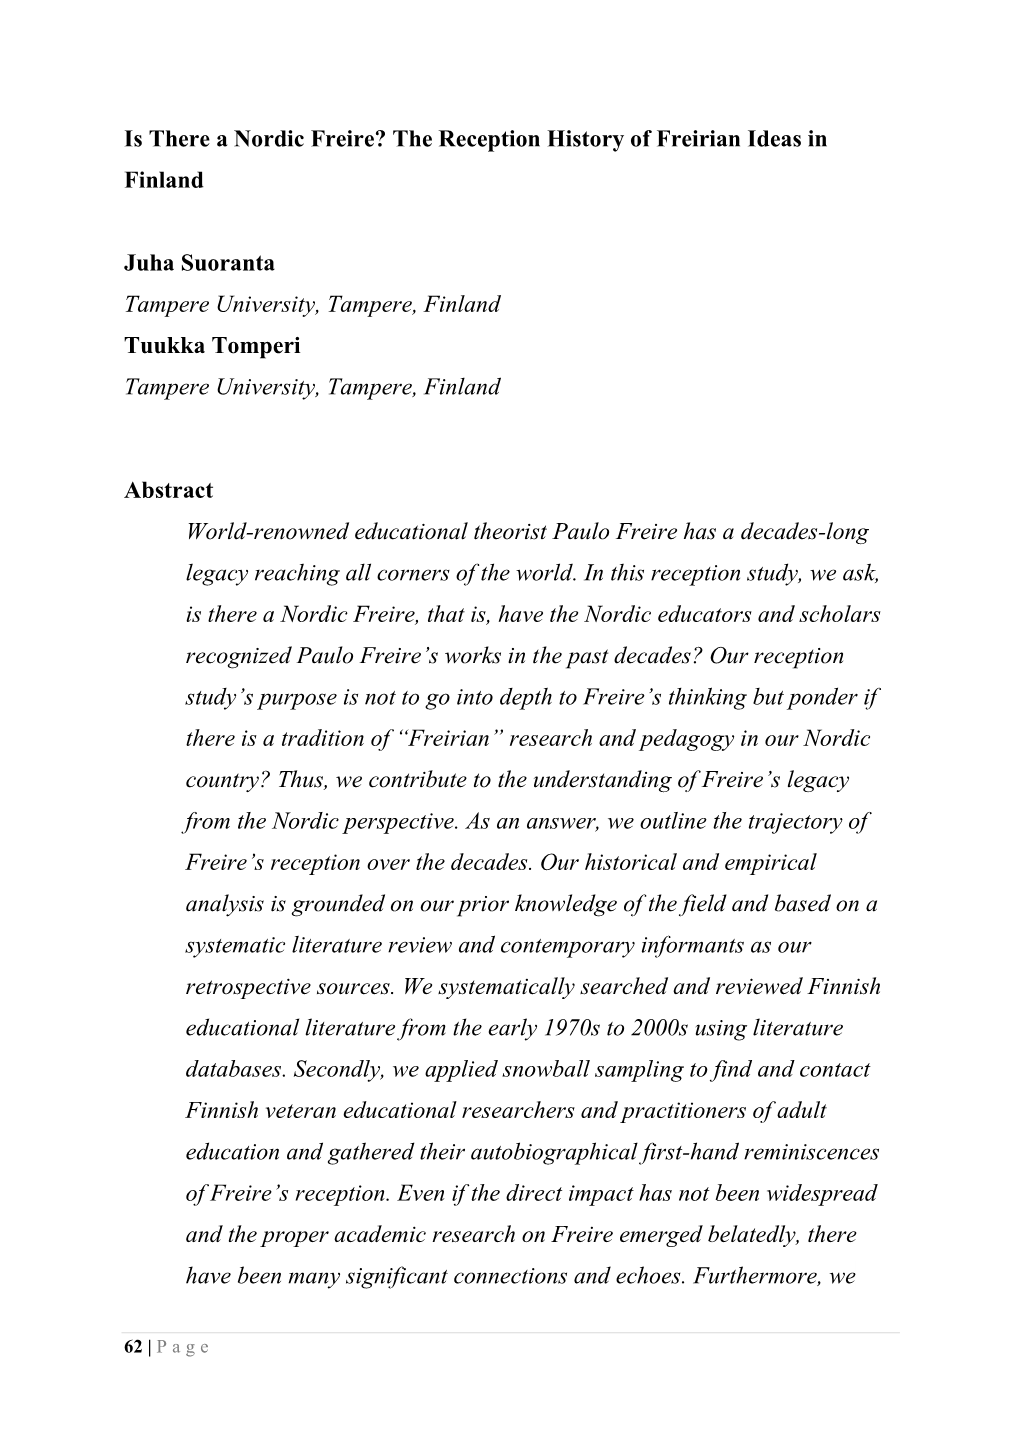 Is There a Nordic Freire? the Reception History of Freirian Ideas in Finland